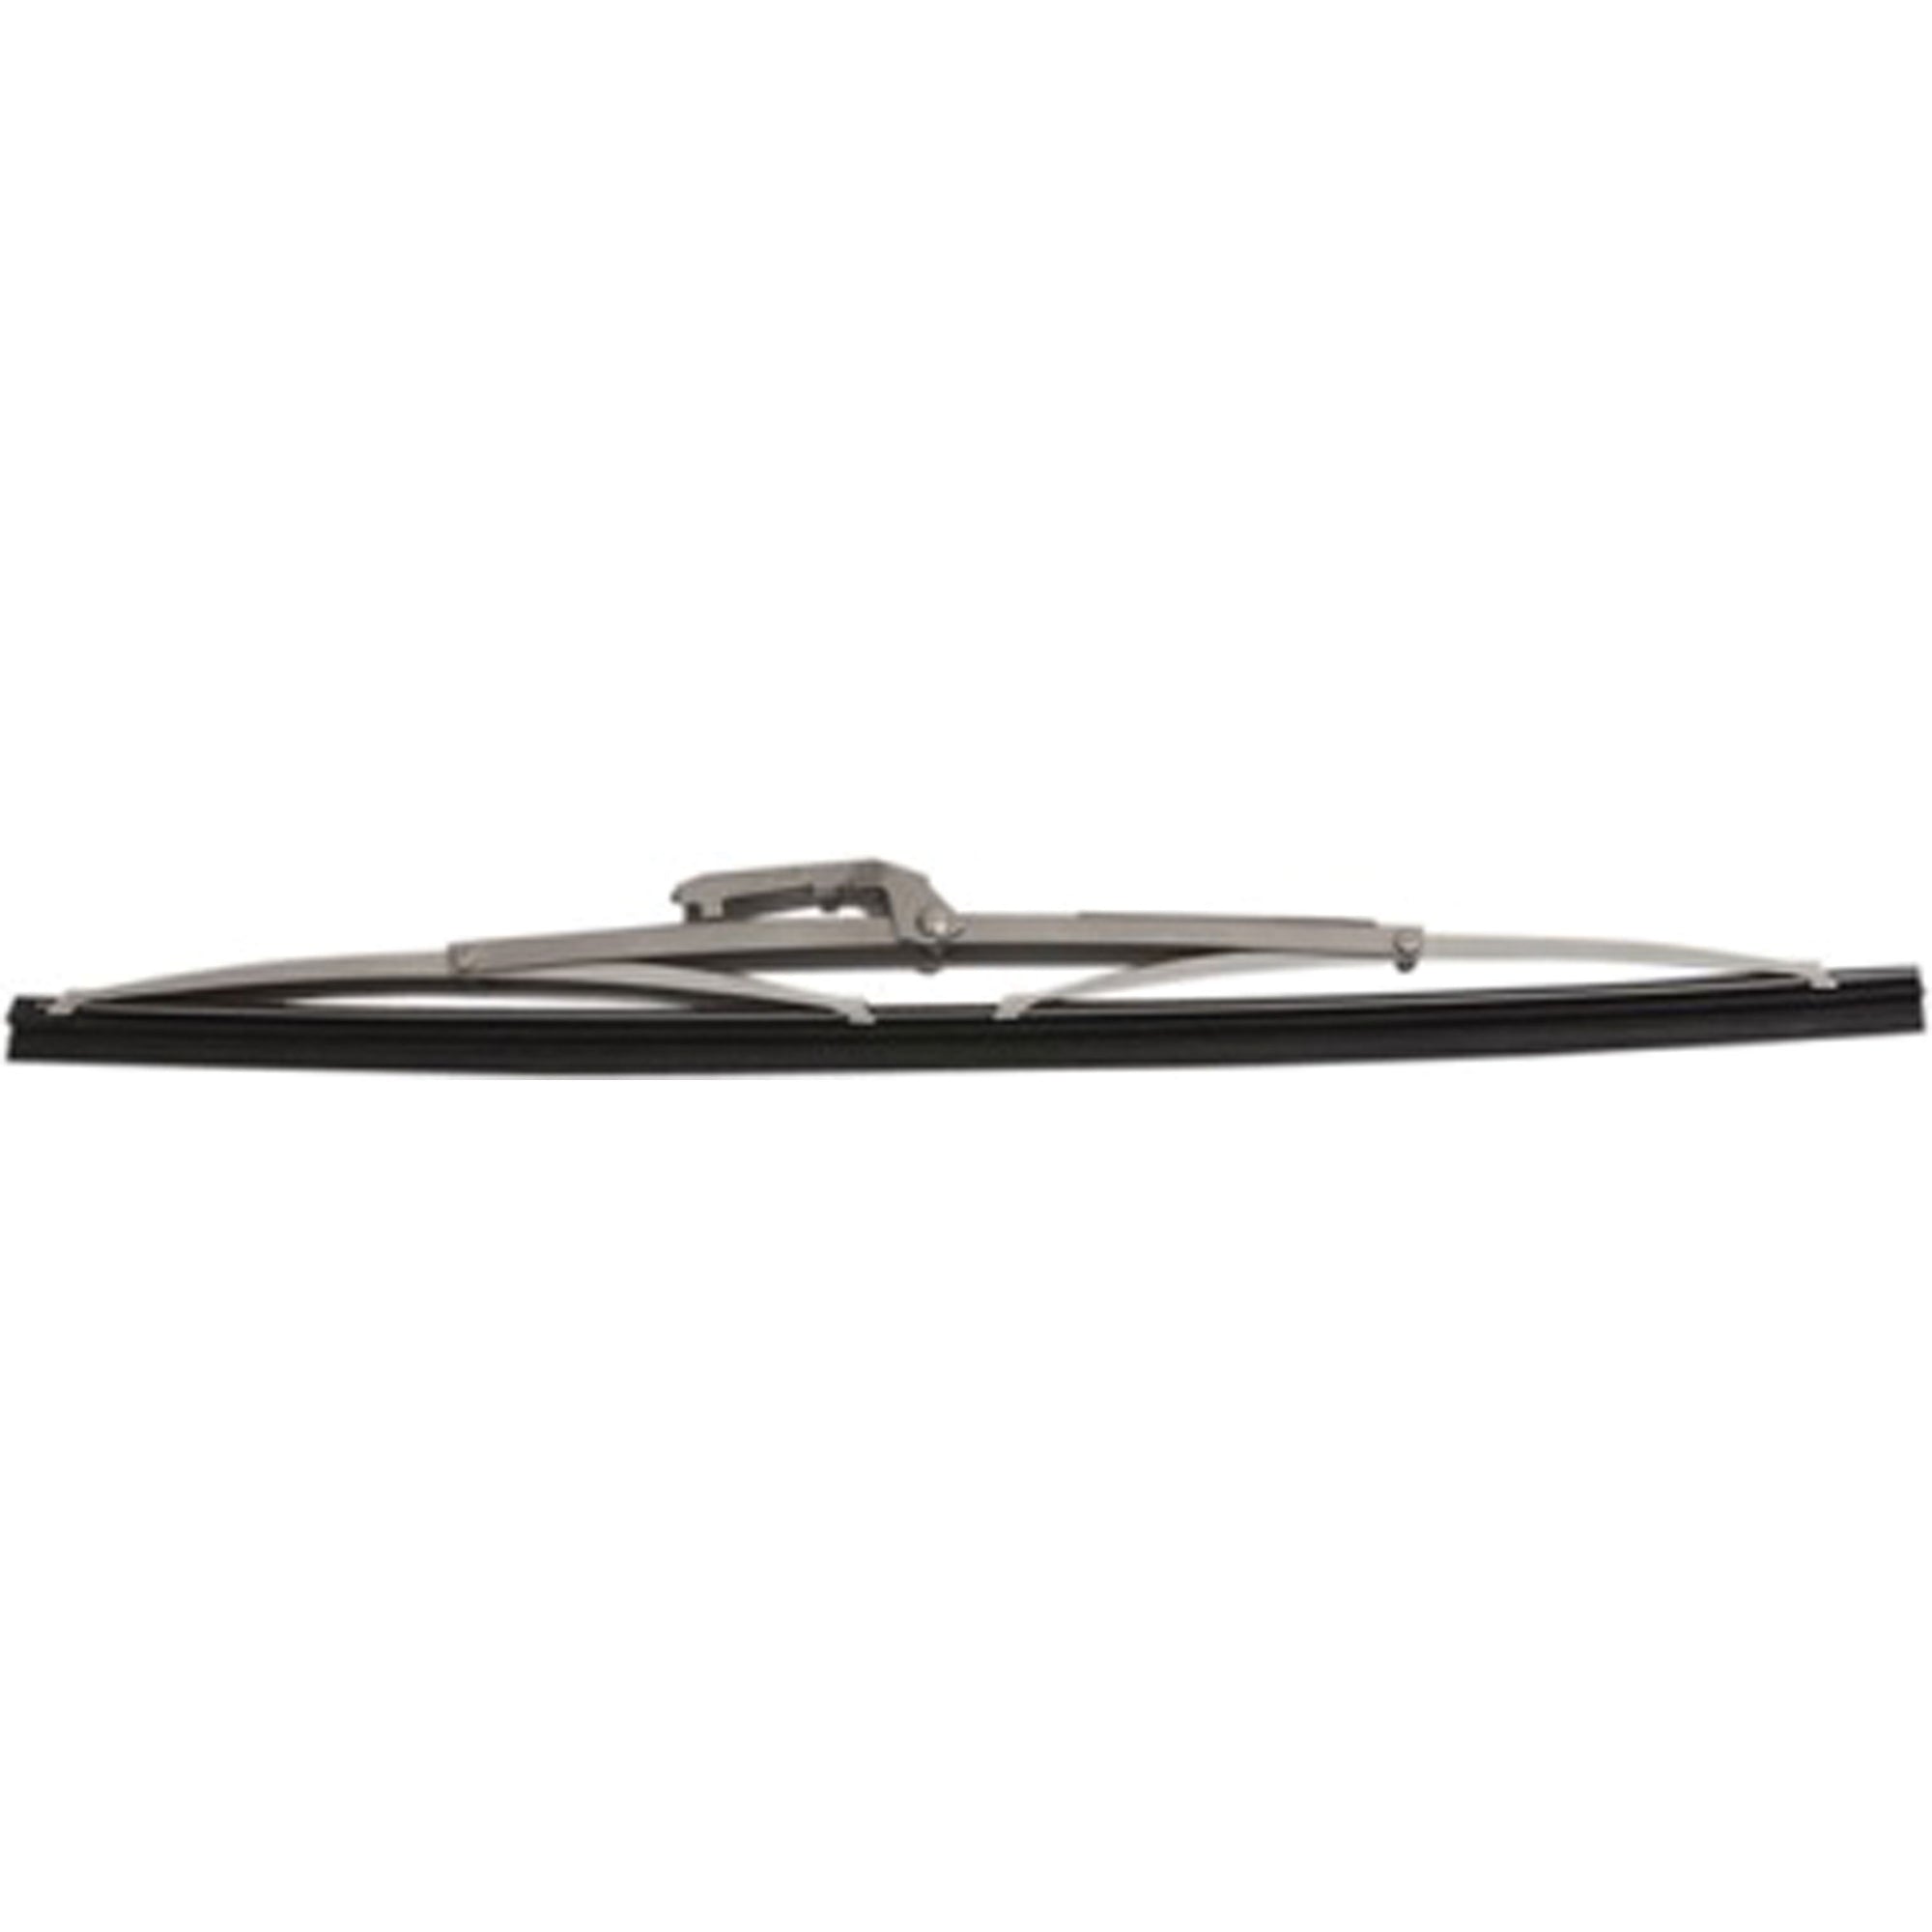 Sea-Dog 414216S-1 Stainless Steel Wiper Blade - 16", Silver